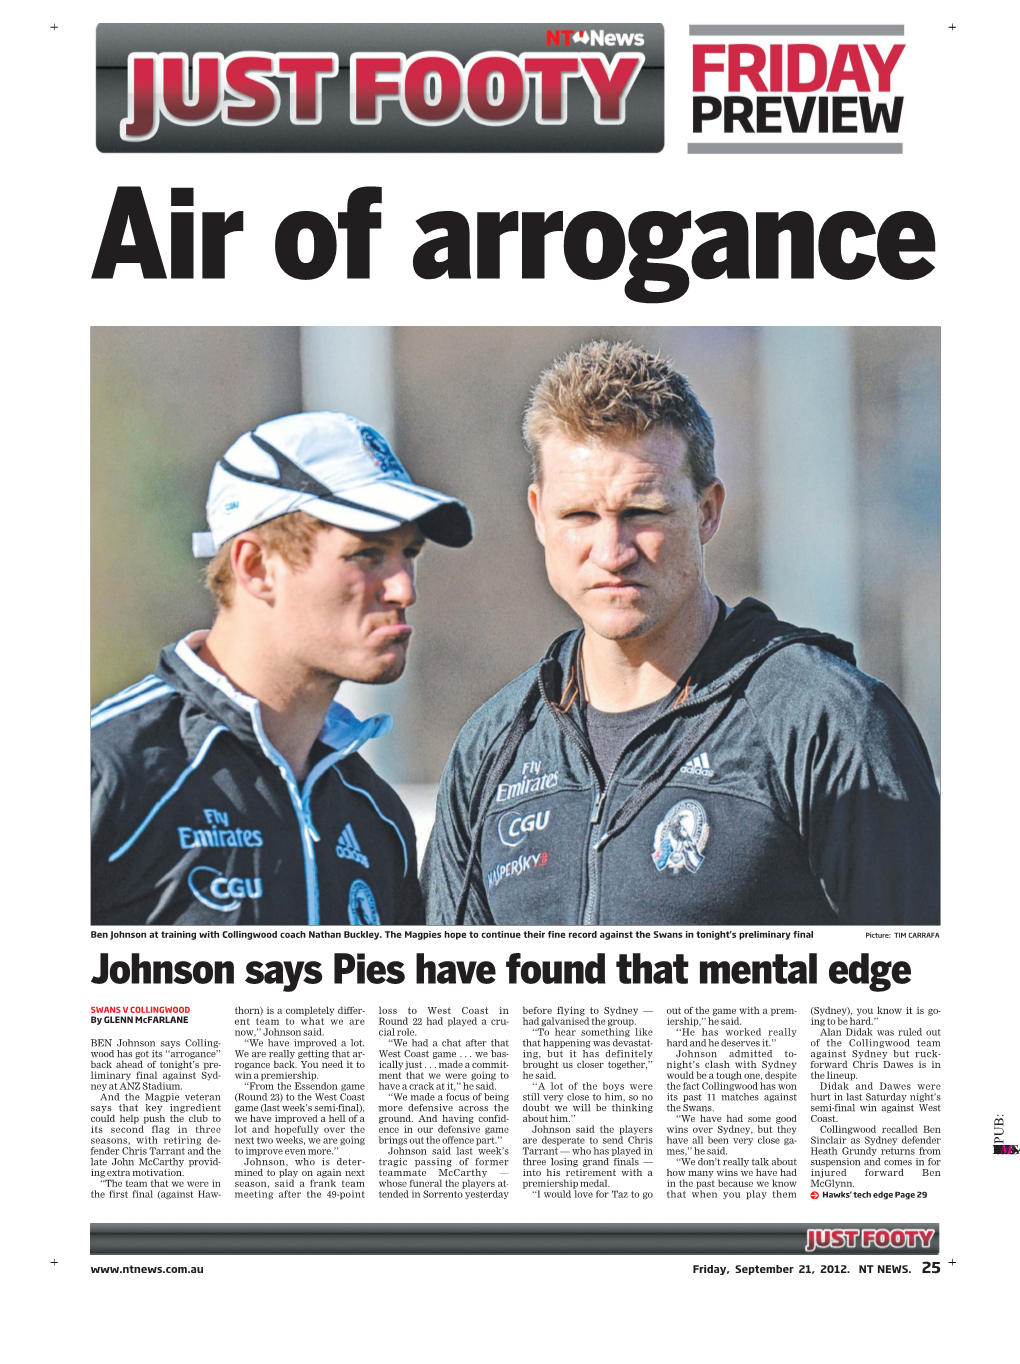 Johnson Says Pies Have Found That Mental Edge